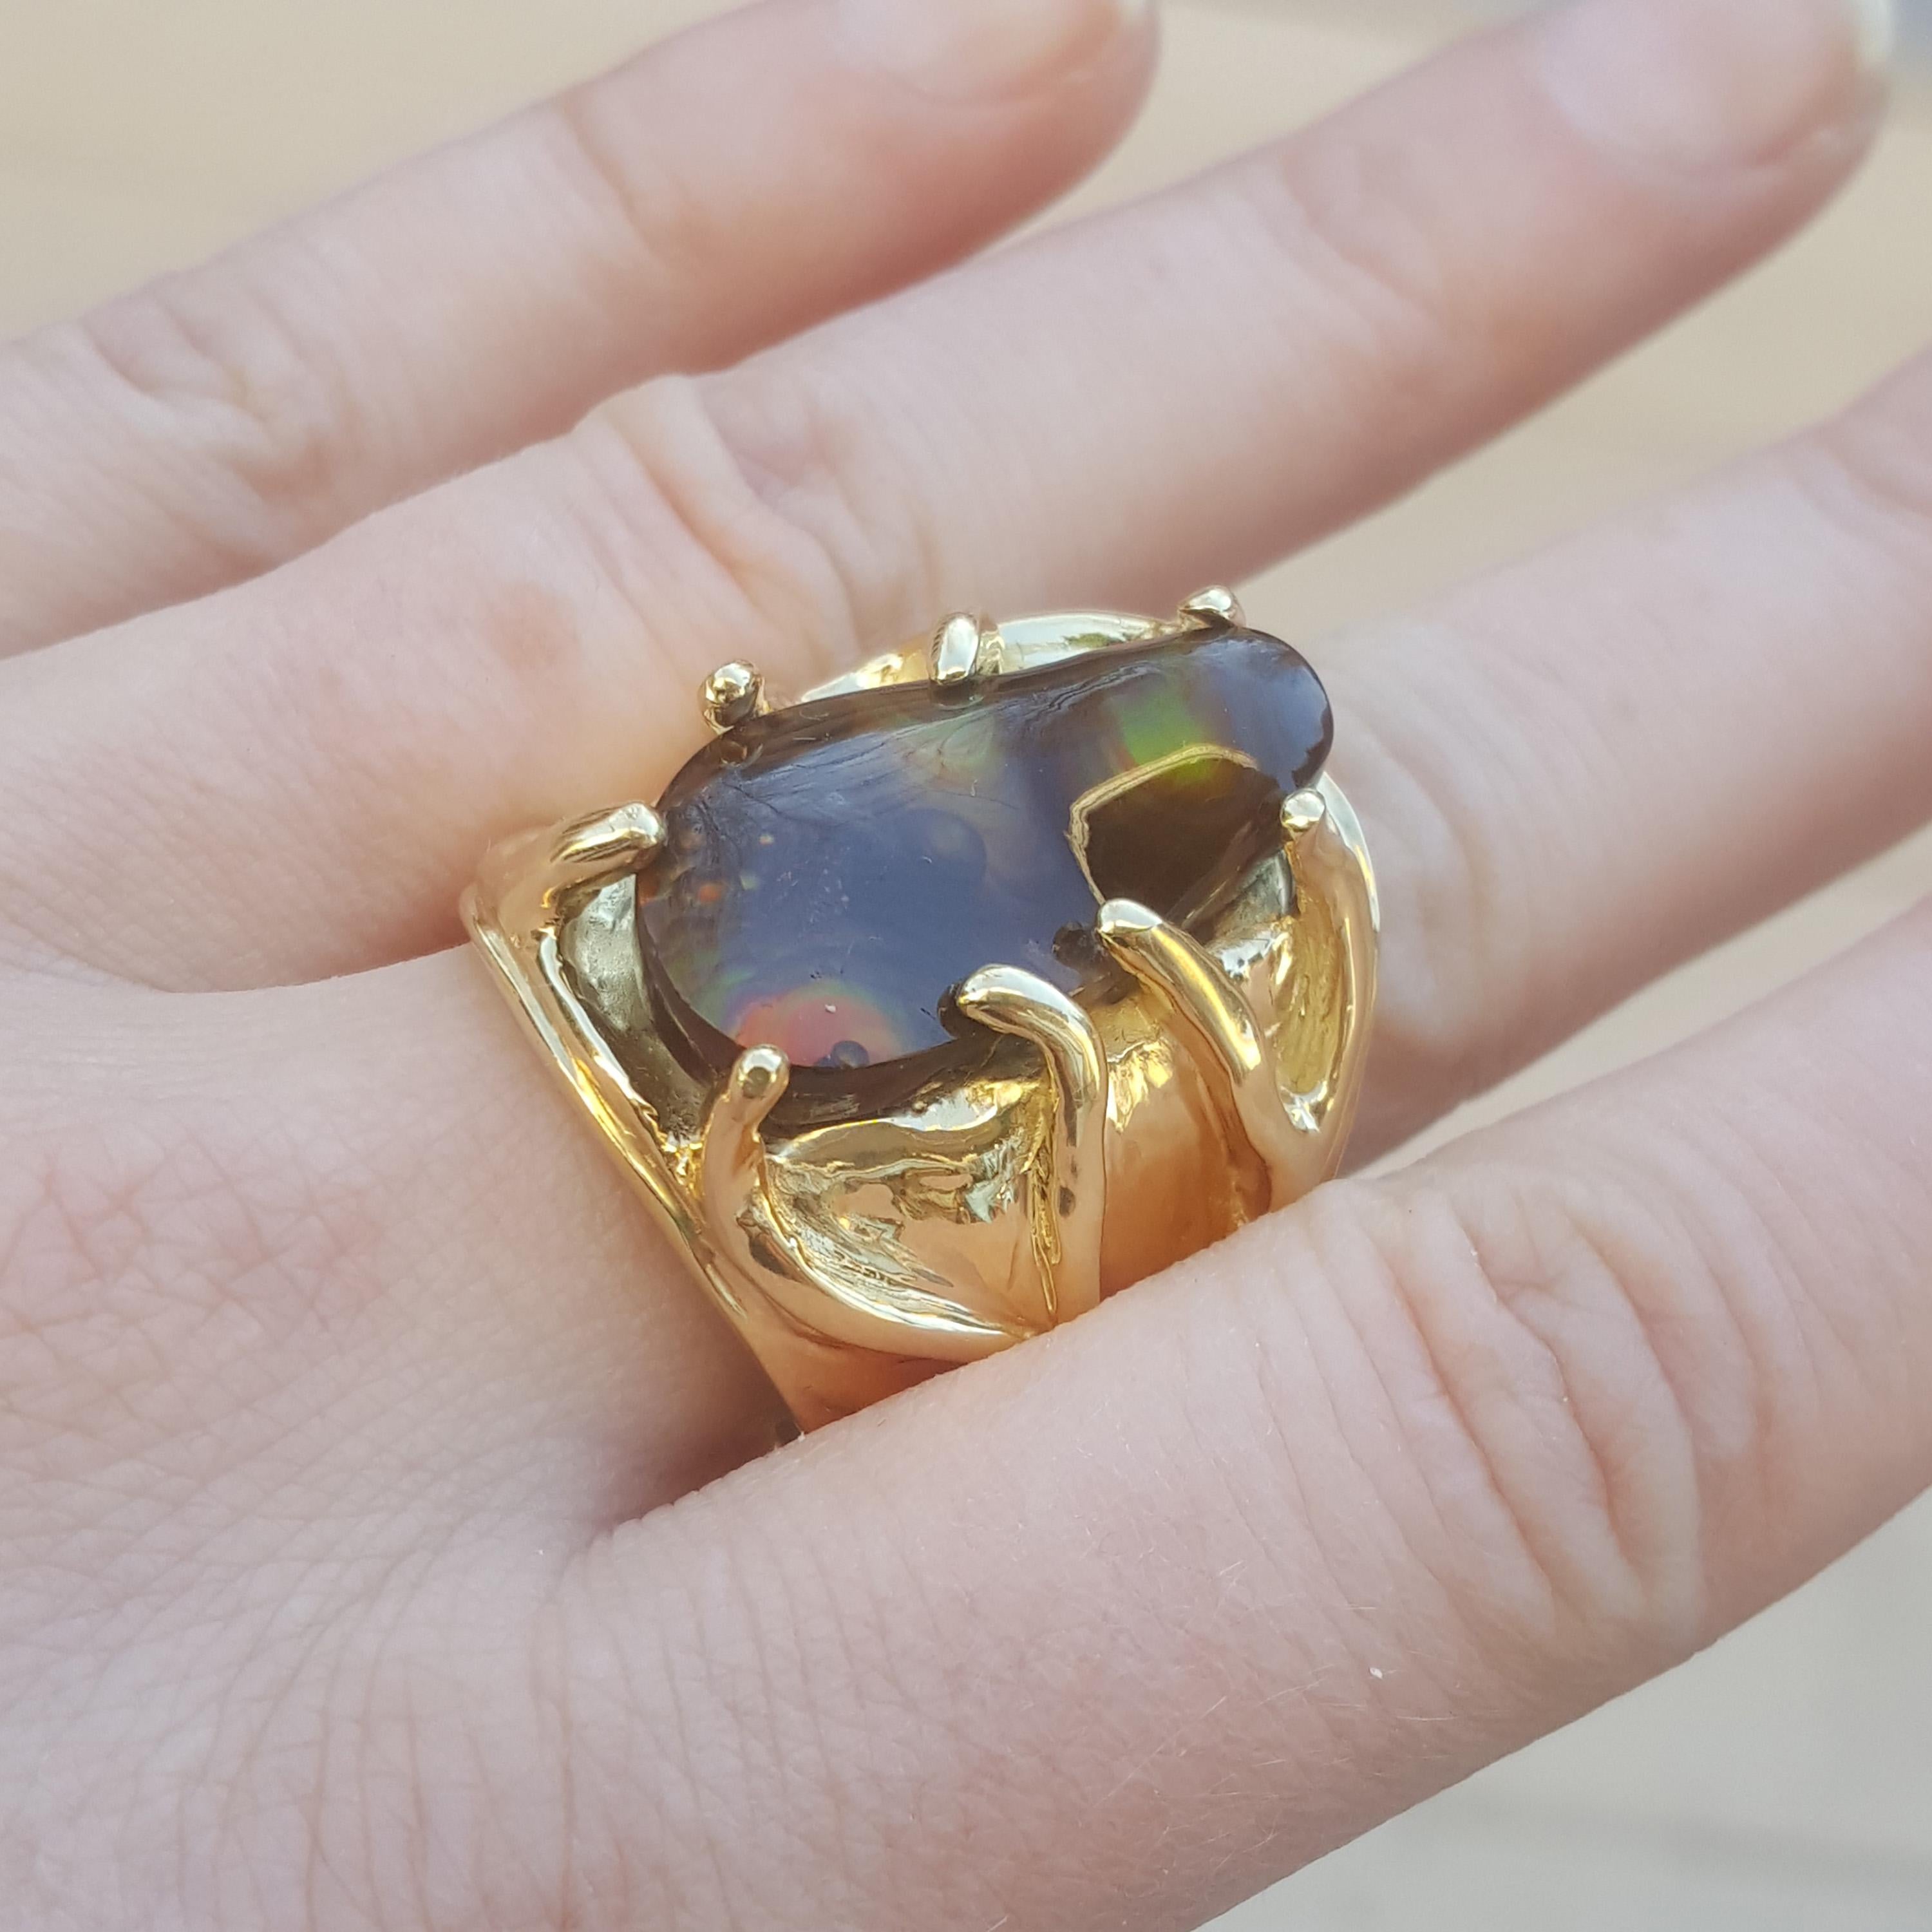 Fire agate is one of my favorite materials for men’s rings; the subtle elegance is great for making a statement without too much noise. This particular ring is massive, weighing in at over 56g of solid 18kt gold. The bold, statement making piece is